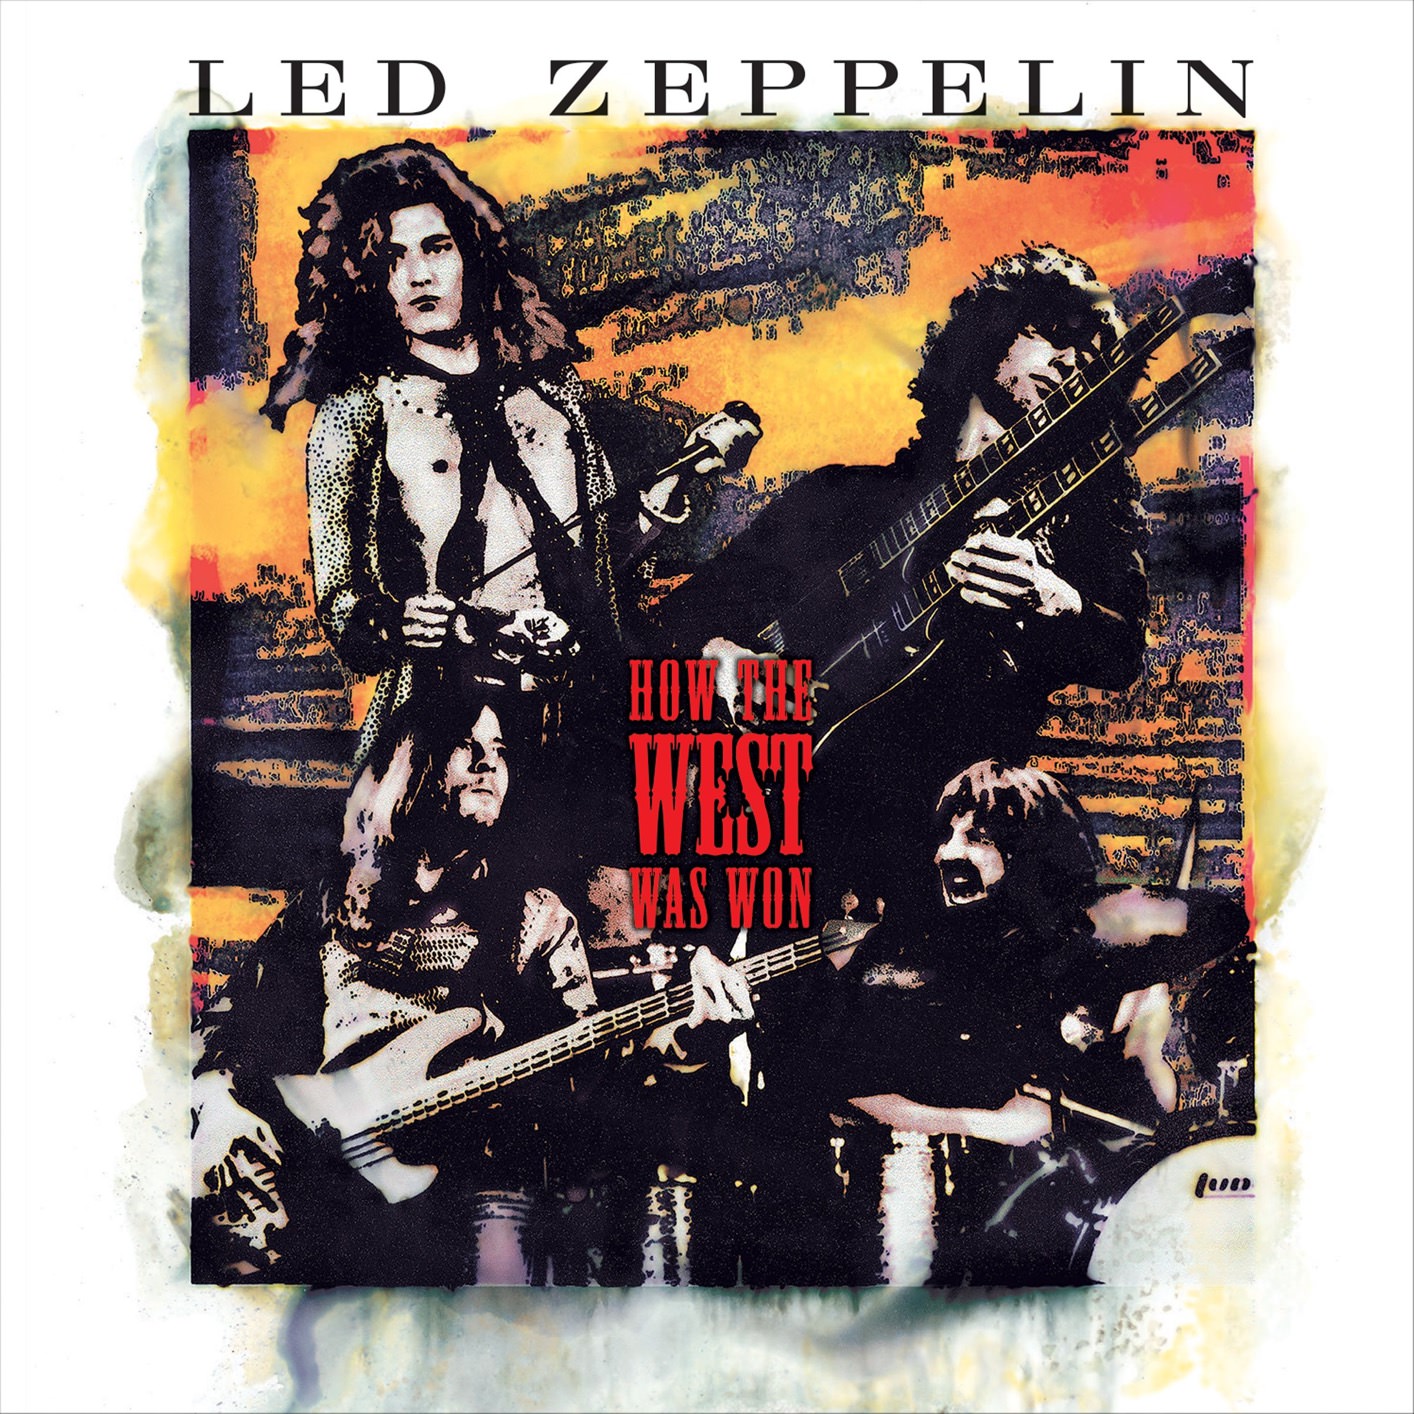 Led Zeppelin - How The West Was Won (Live) [Remastered] (1972/2003/2018) [HighResAudio FLAC 24bit/96kHz]